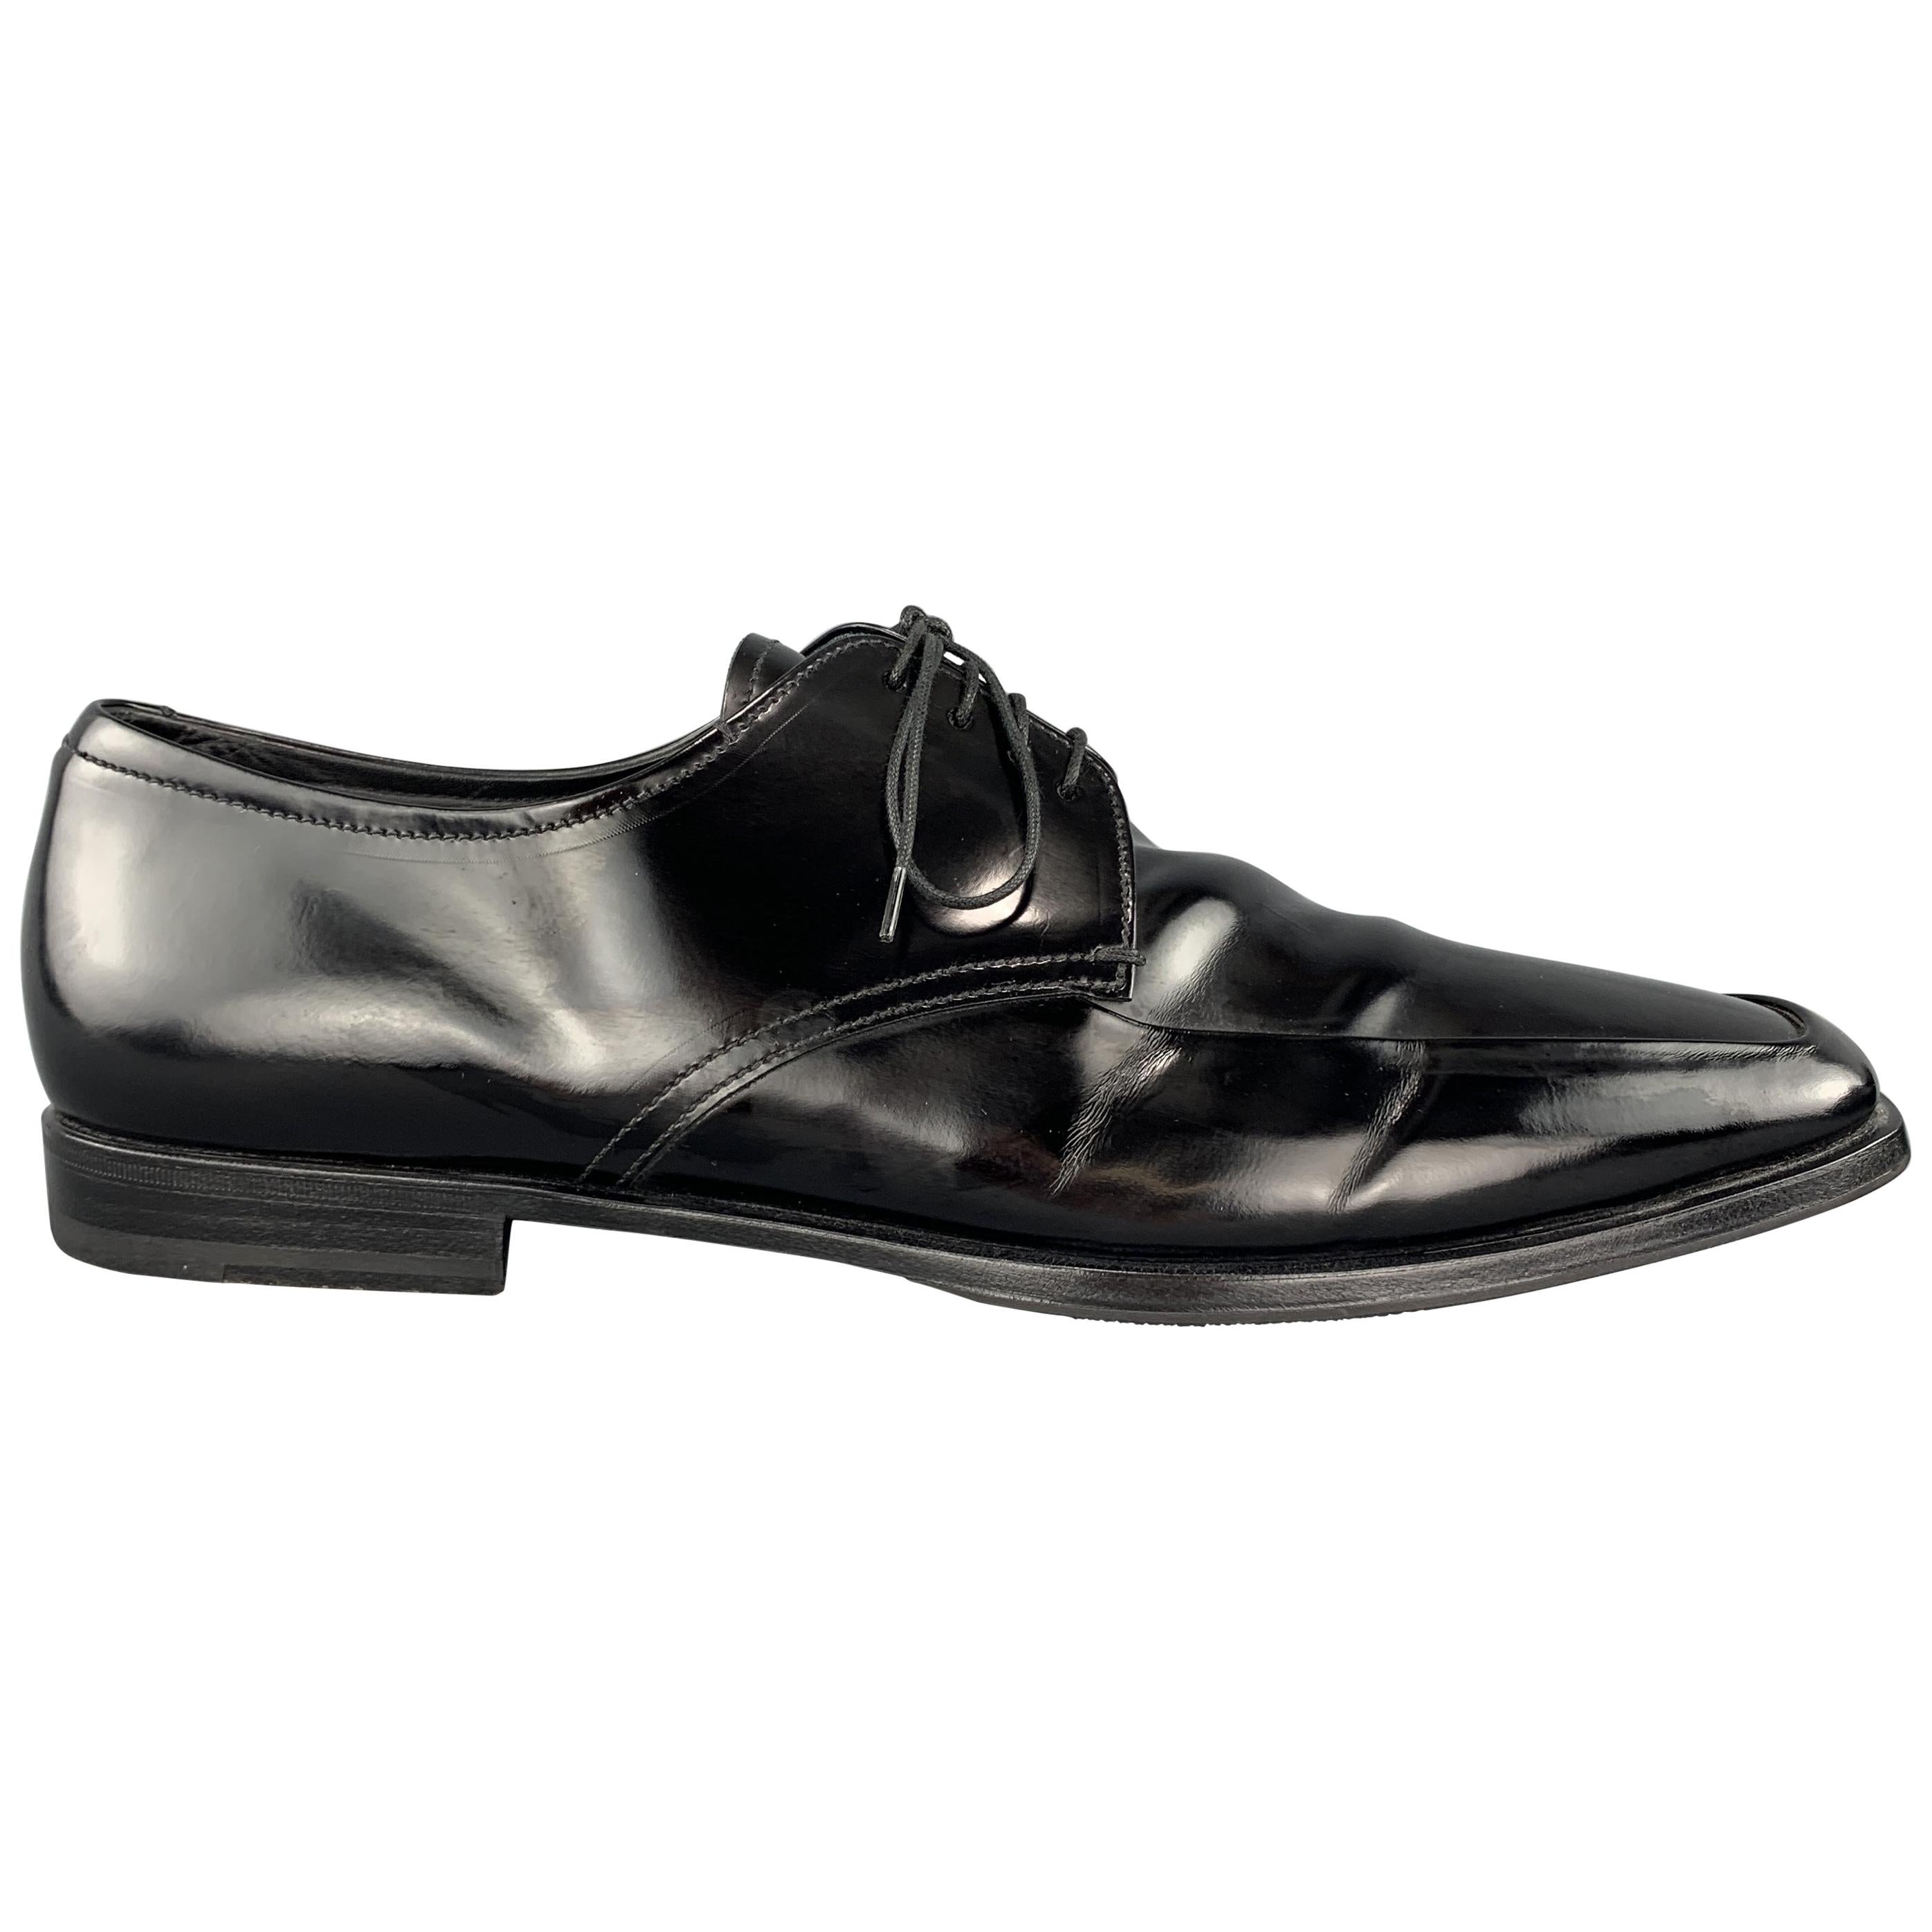 PRADA Black Patent Leather MARY JANE PUMPS Shoes SIZE 40 1/2 For Sale ...